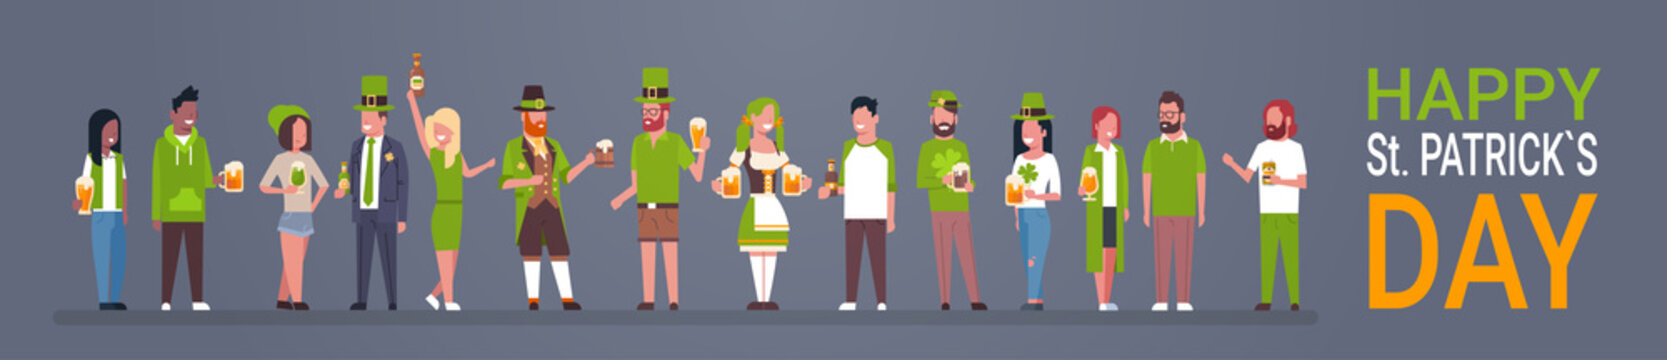 Happy St. Patrick Day Party Poster, Group Of People In Green Clothes Drinking Beer Horizontal Banner Flat Vector Illustration